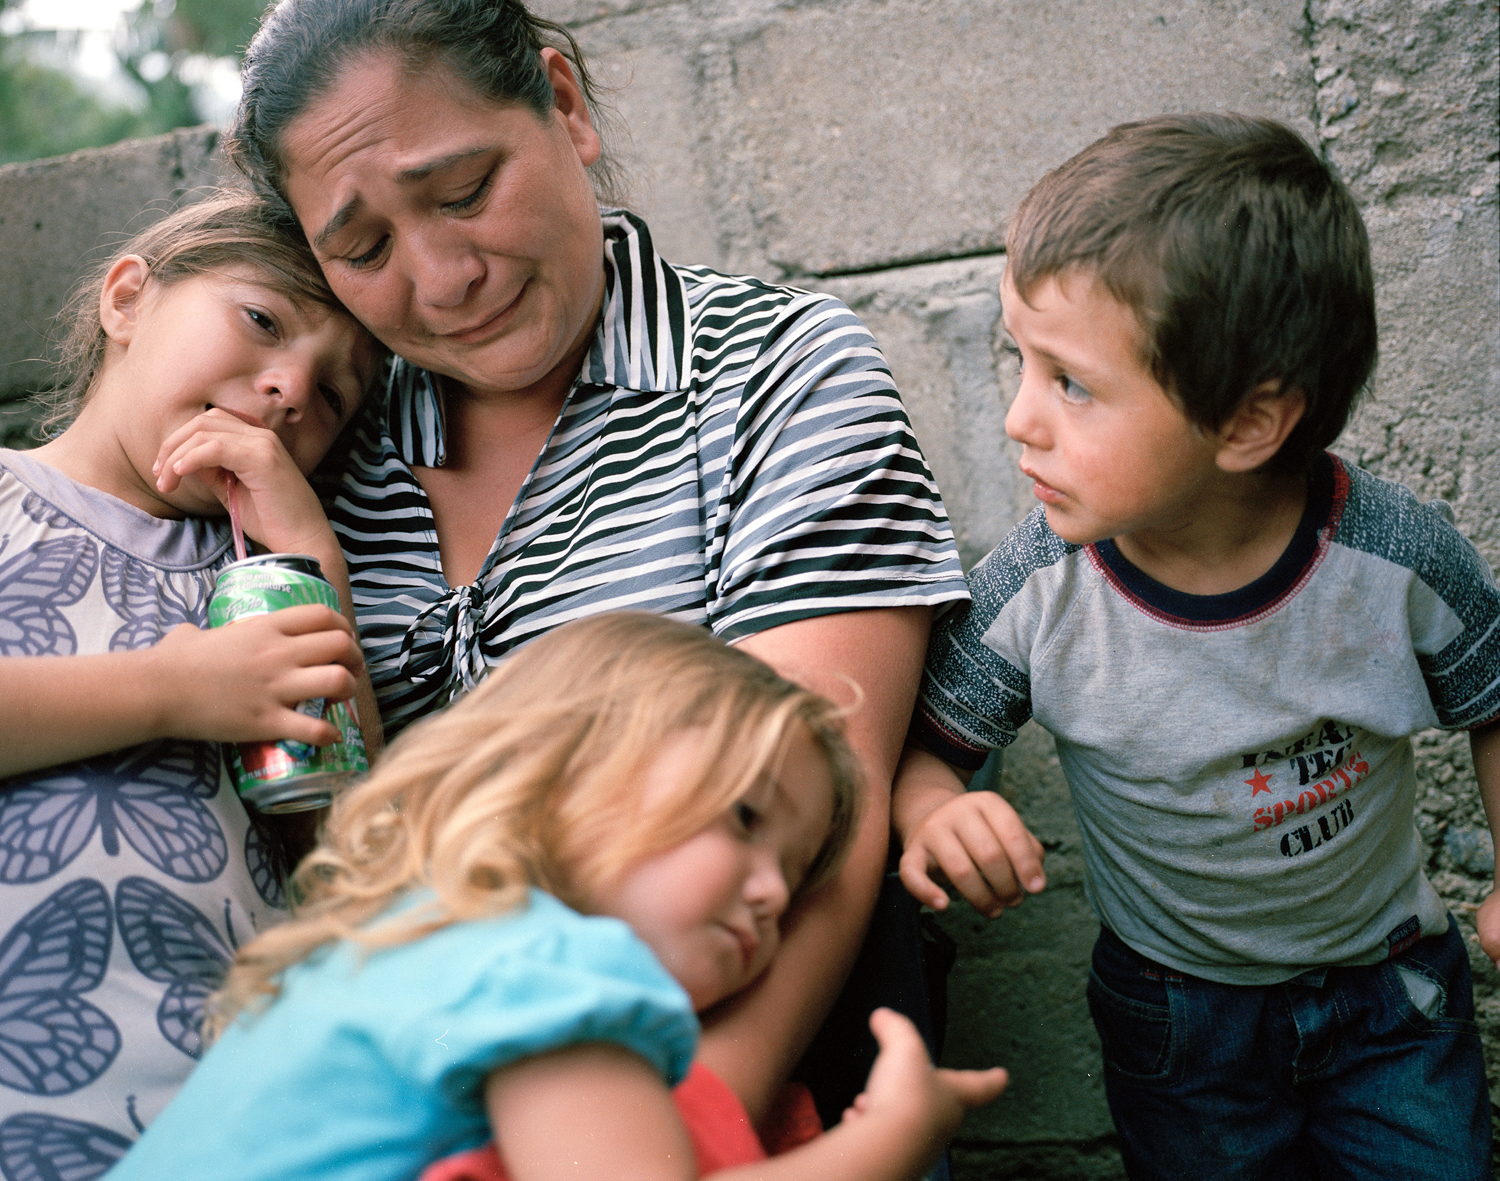  Lizeth Cerros mourns her murdered husband, Darwin Franco, with her children, later she received another death threat. Franco was a community organizer. 